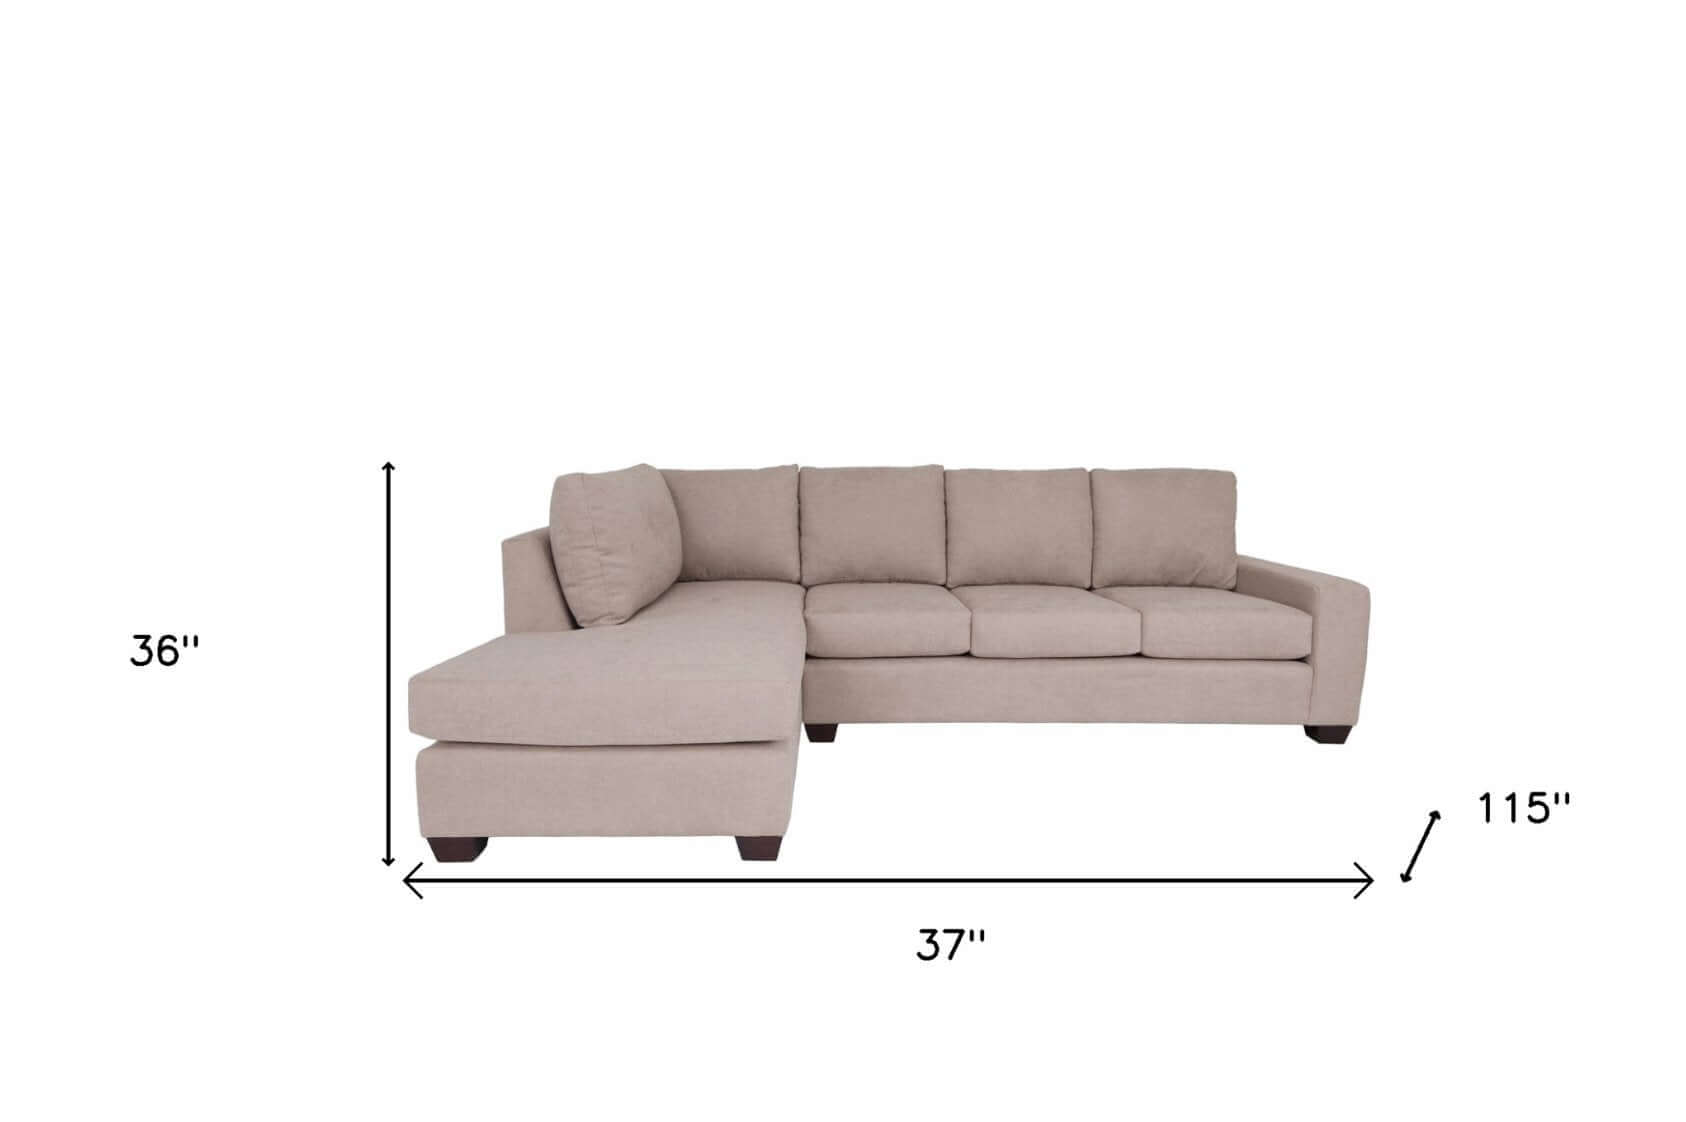 Modern Beige Polyester Blend L-Shaped 2pc. Chaise Sectional Sofa - Revel Sofa 